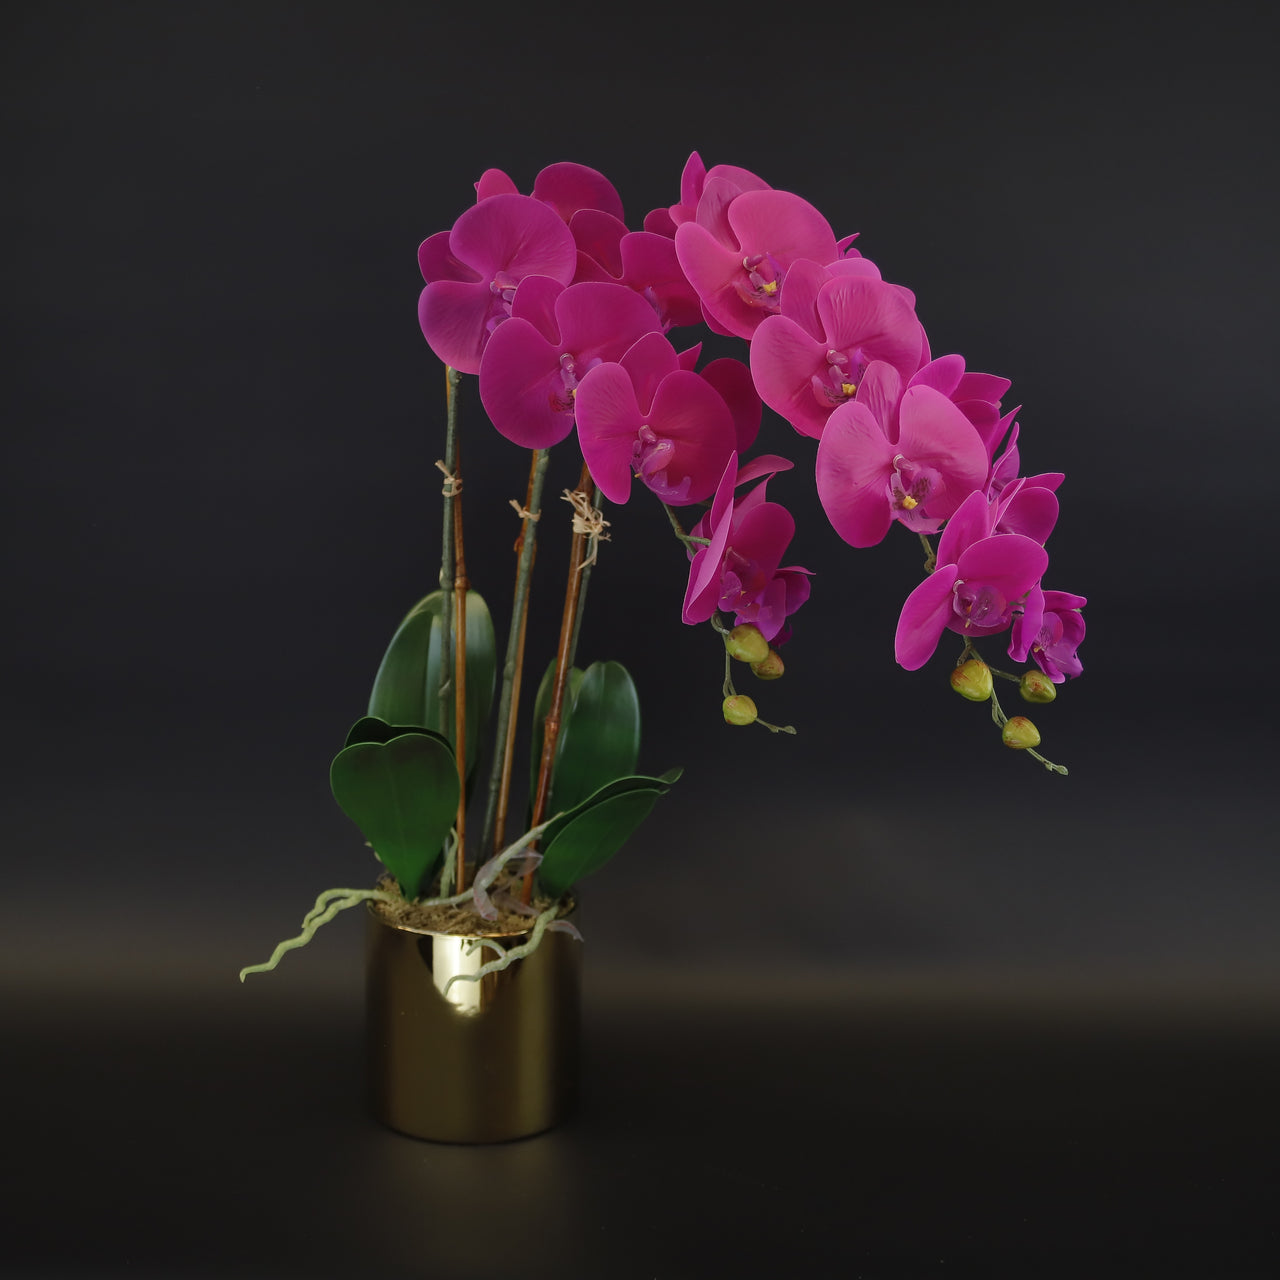 HCFL9592 - Magenta Orchid in Gold Pot